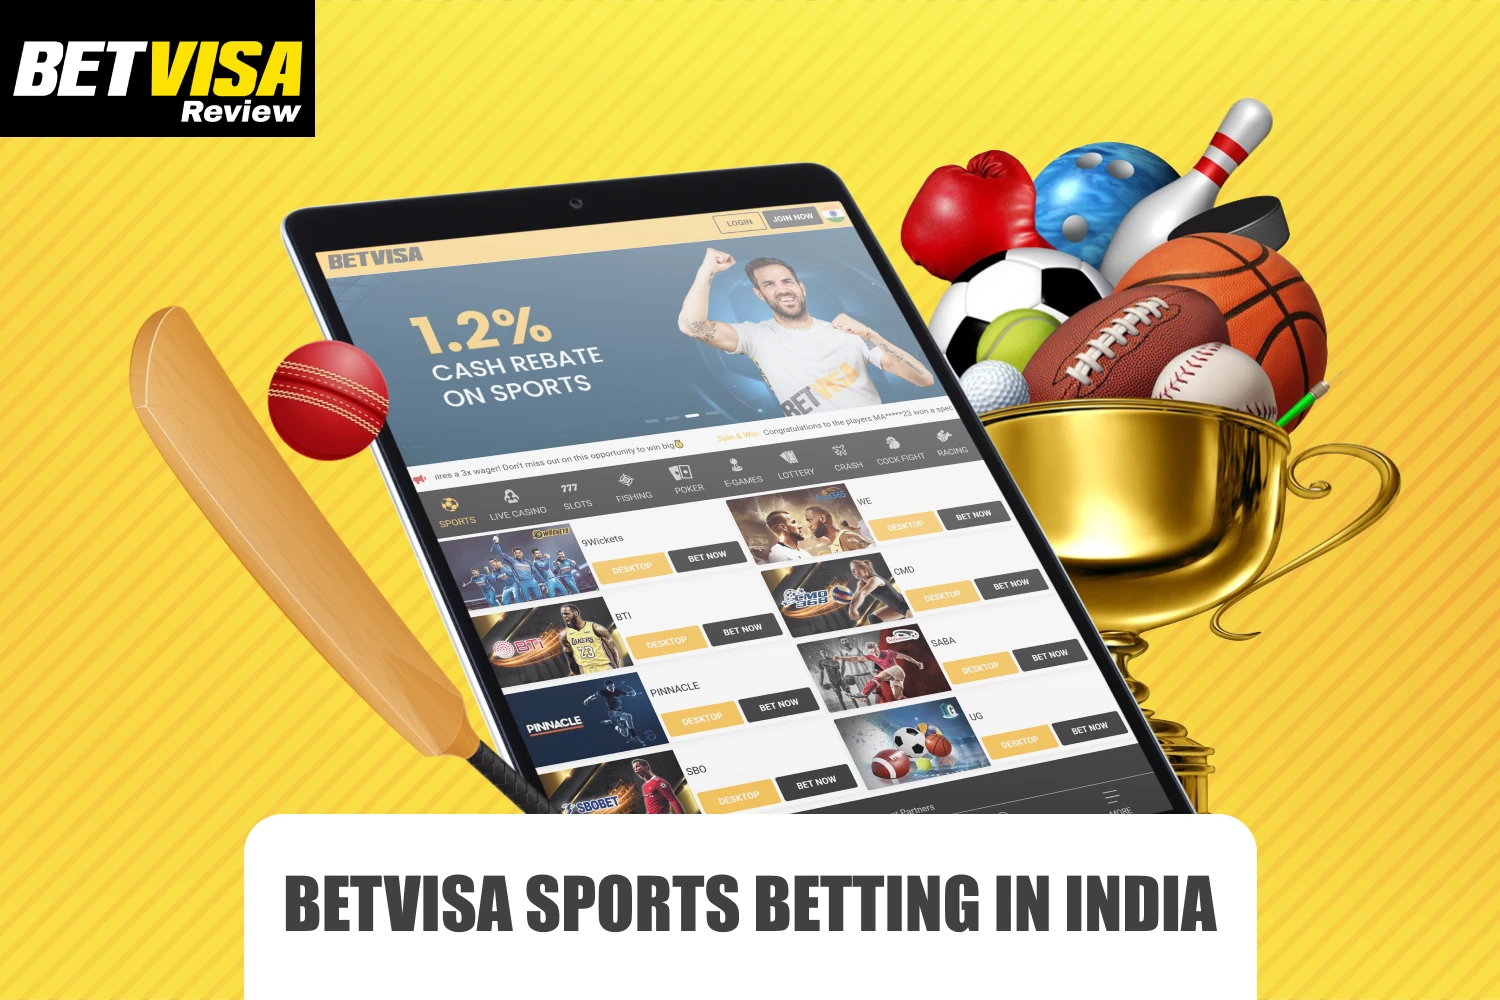 Betvisa offers a full range of betting options on tens of thousands of different events, among which players from India are sure to find something that interests them